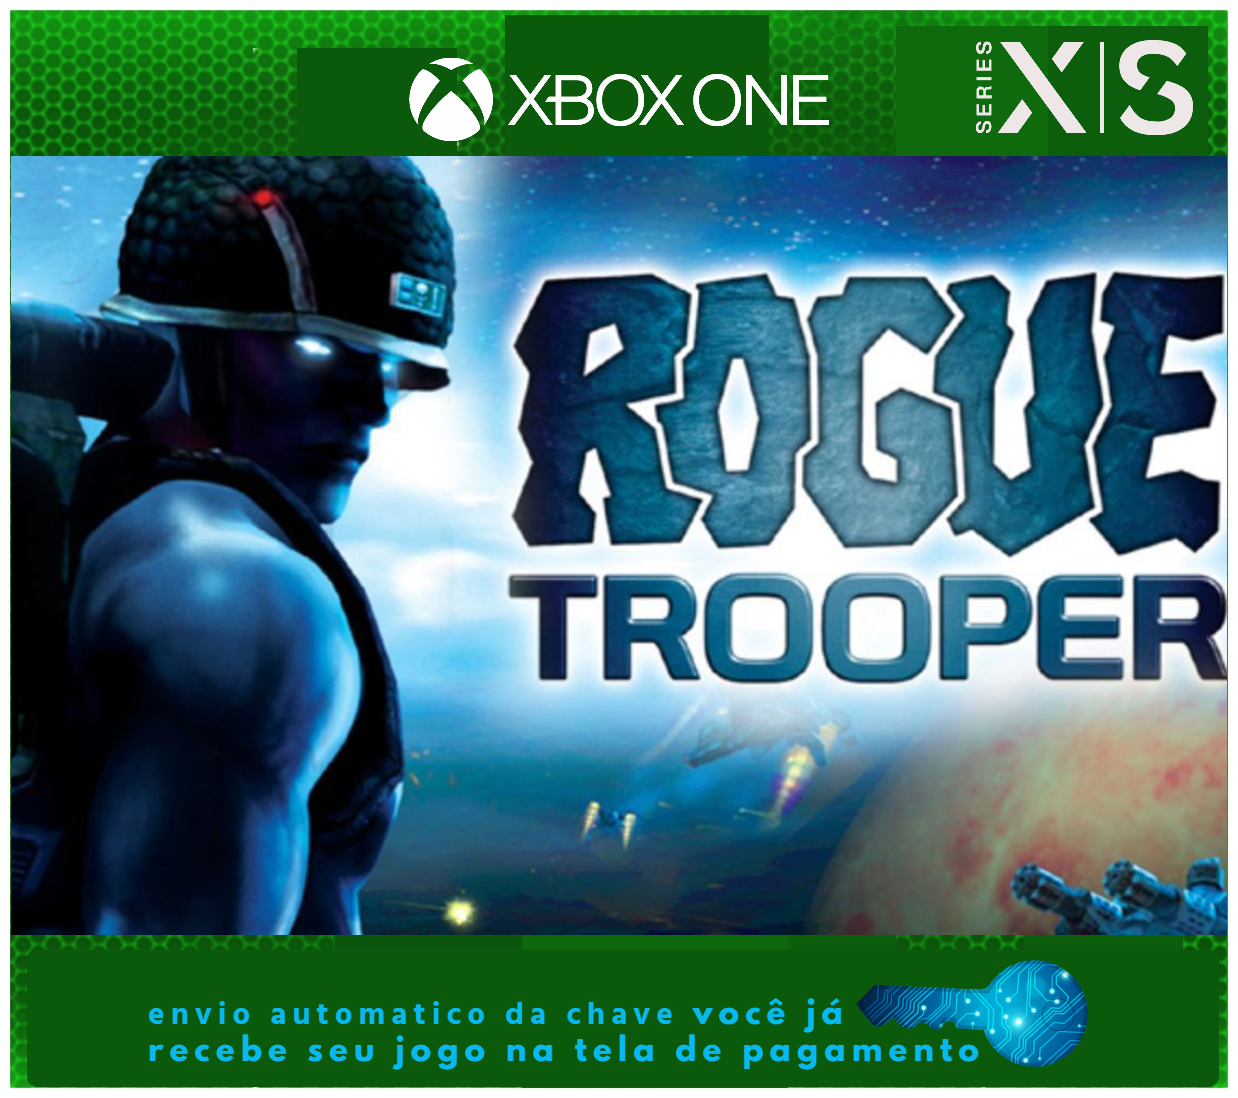 CHAVE 25 rogue trooper SERIES